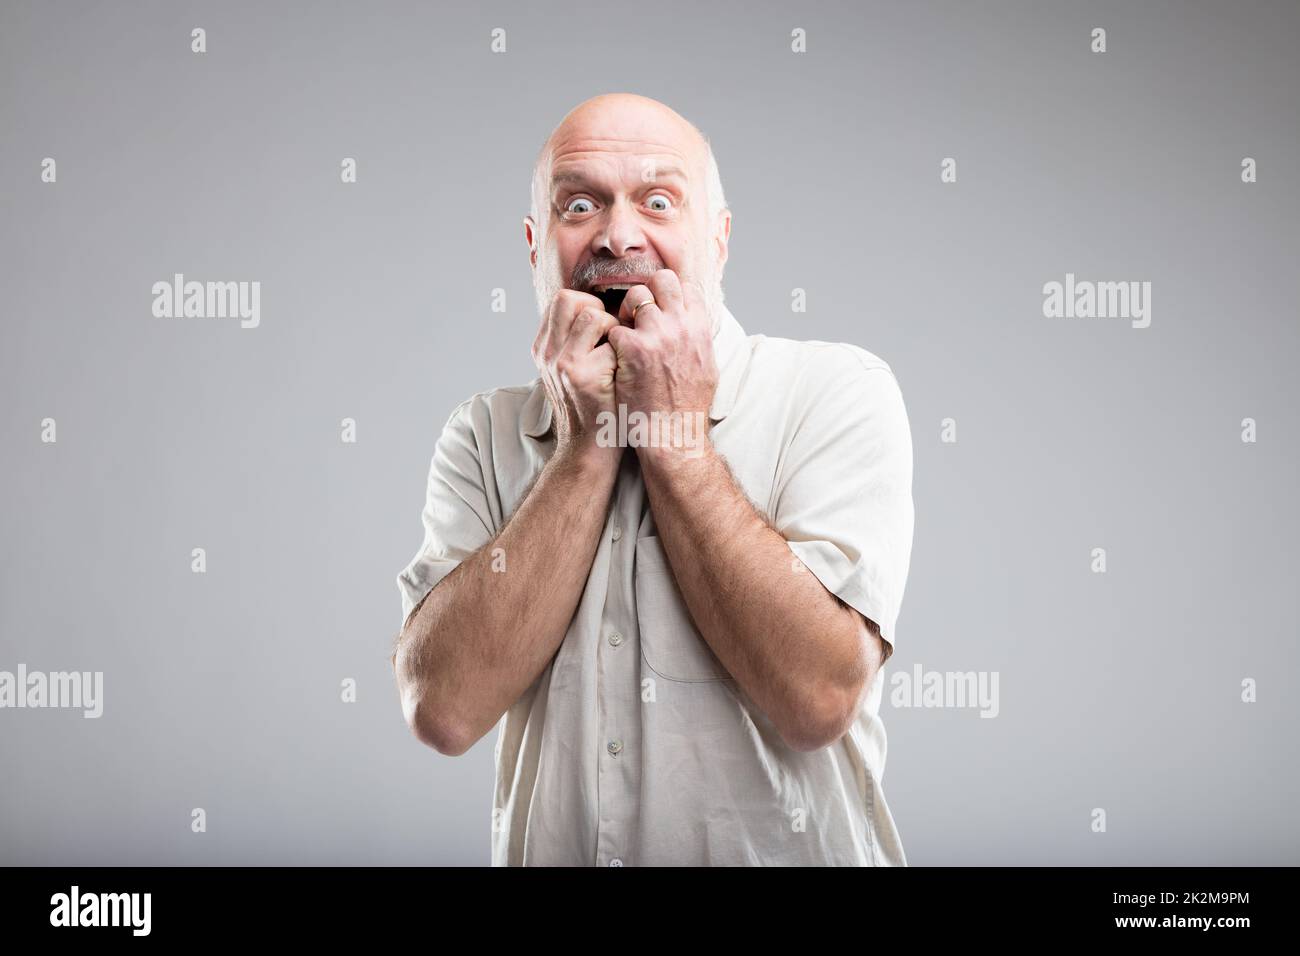 scared man biting his nails because of fear Stock Photo